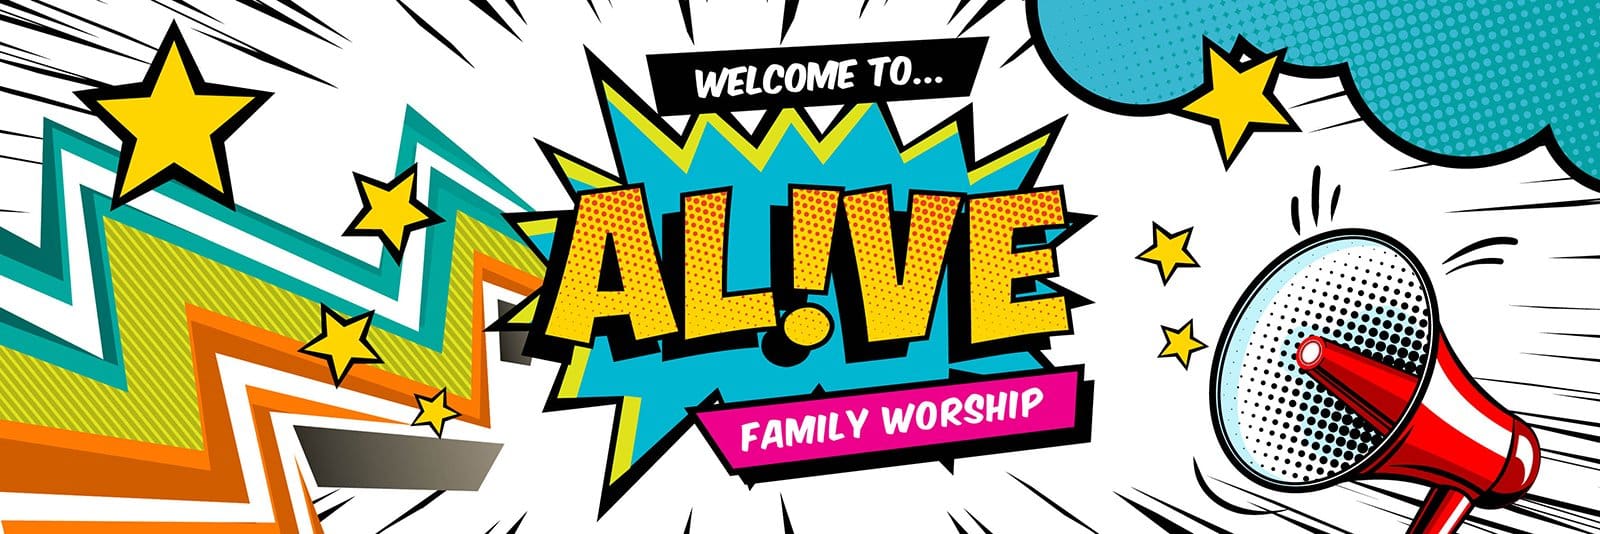 Welcome to Alive Family Worship!